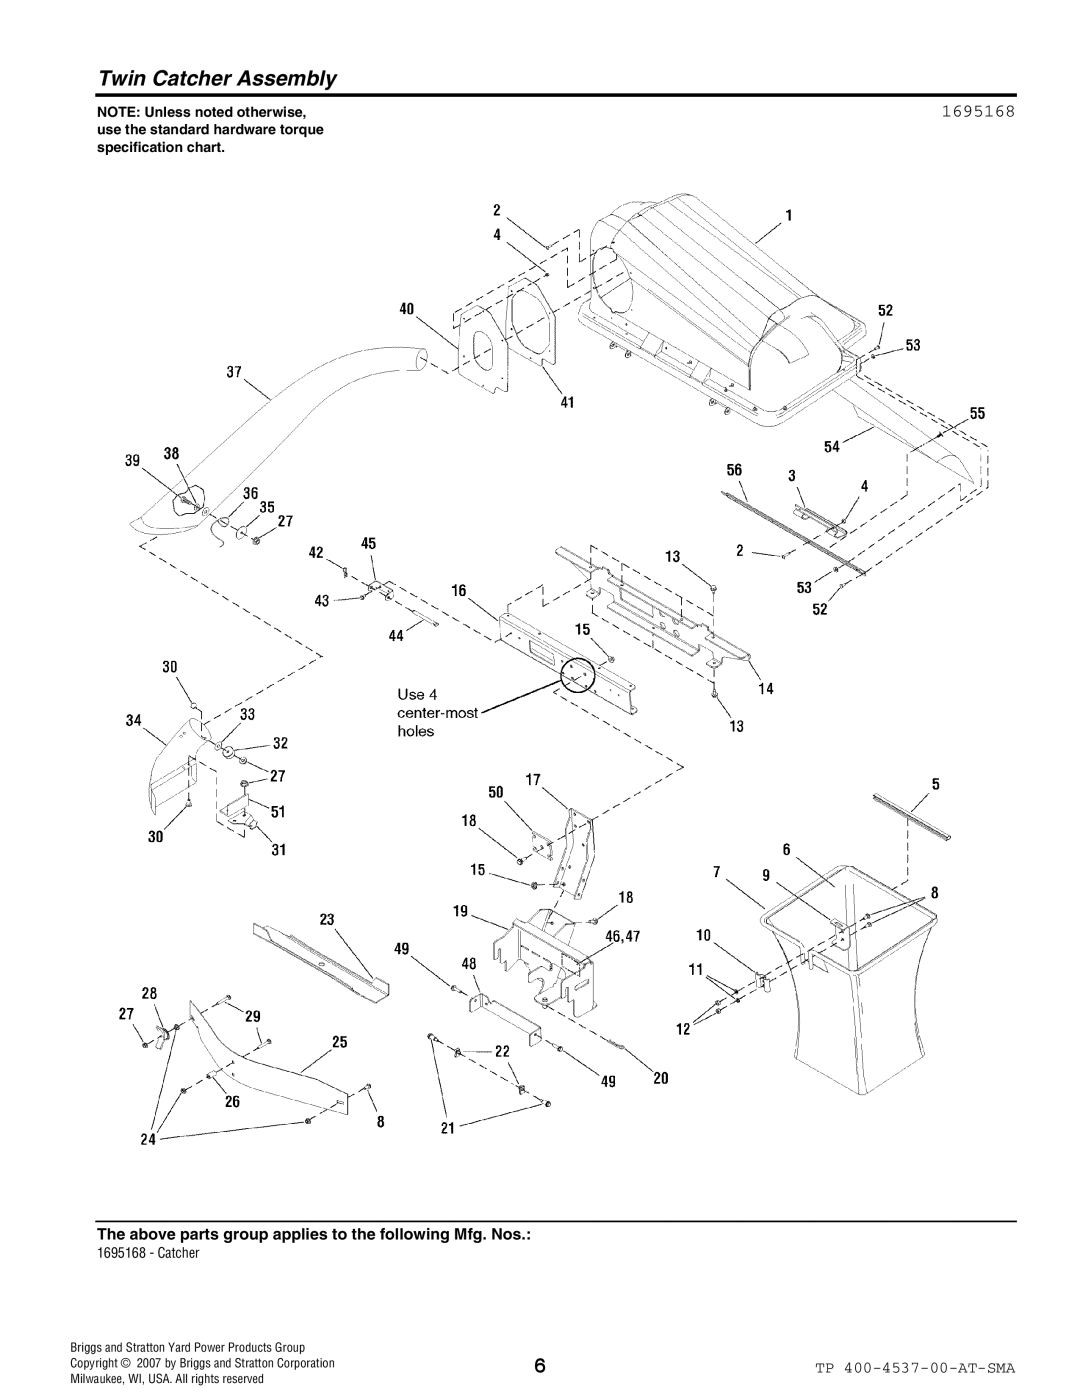 Snapper 4531 Twin Catcher Assembly, 1695168, NOTE Unless noted otherwise, Briggs and Stratton Yard Power Products Group 